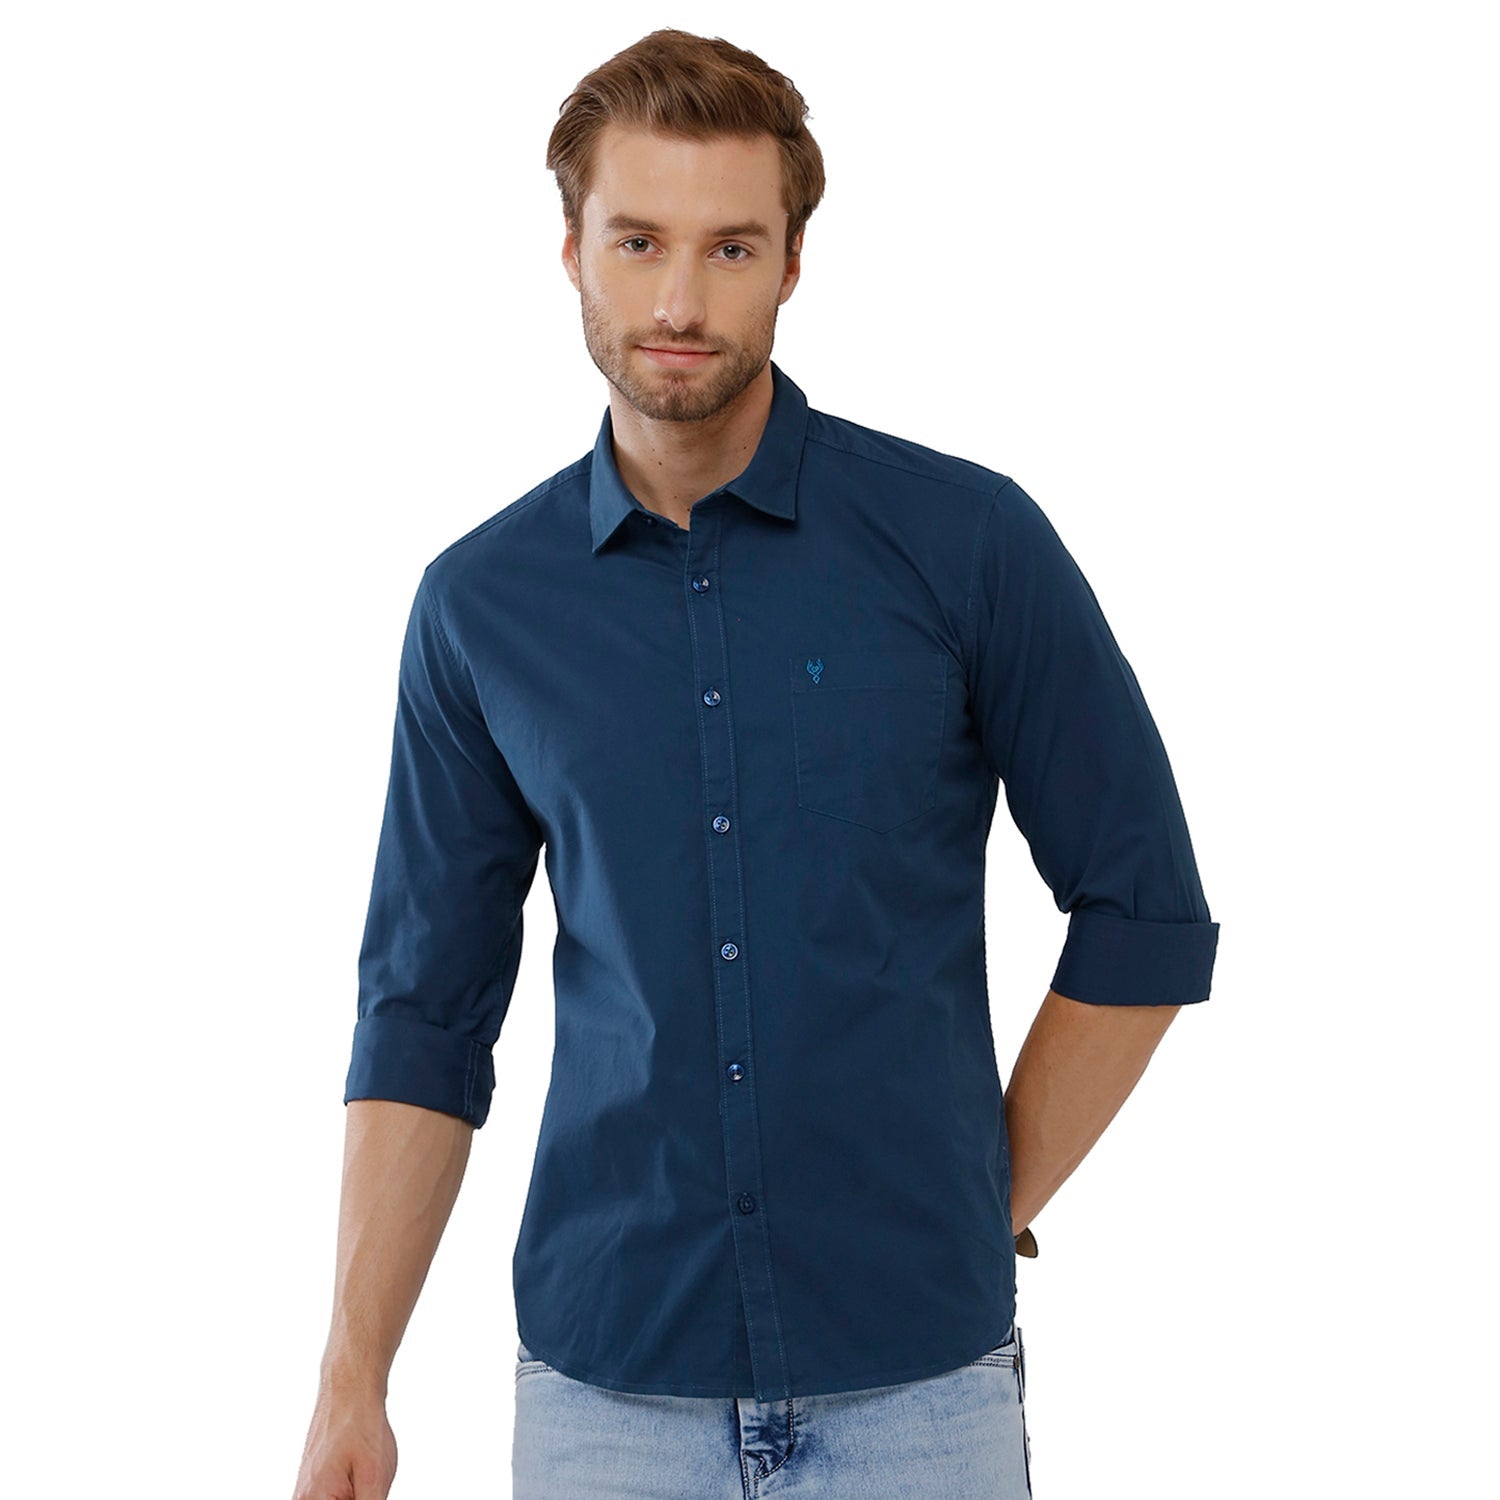 Classic Polo Mens 100% Cotton Solid Slim Fit Navy Blue Color Woven Shirt - SN1 115 E Shirts Classic Polo 